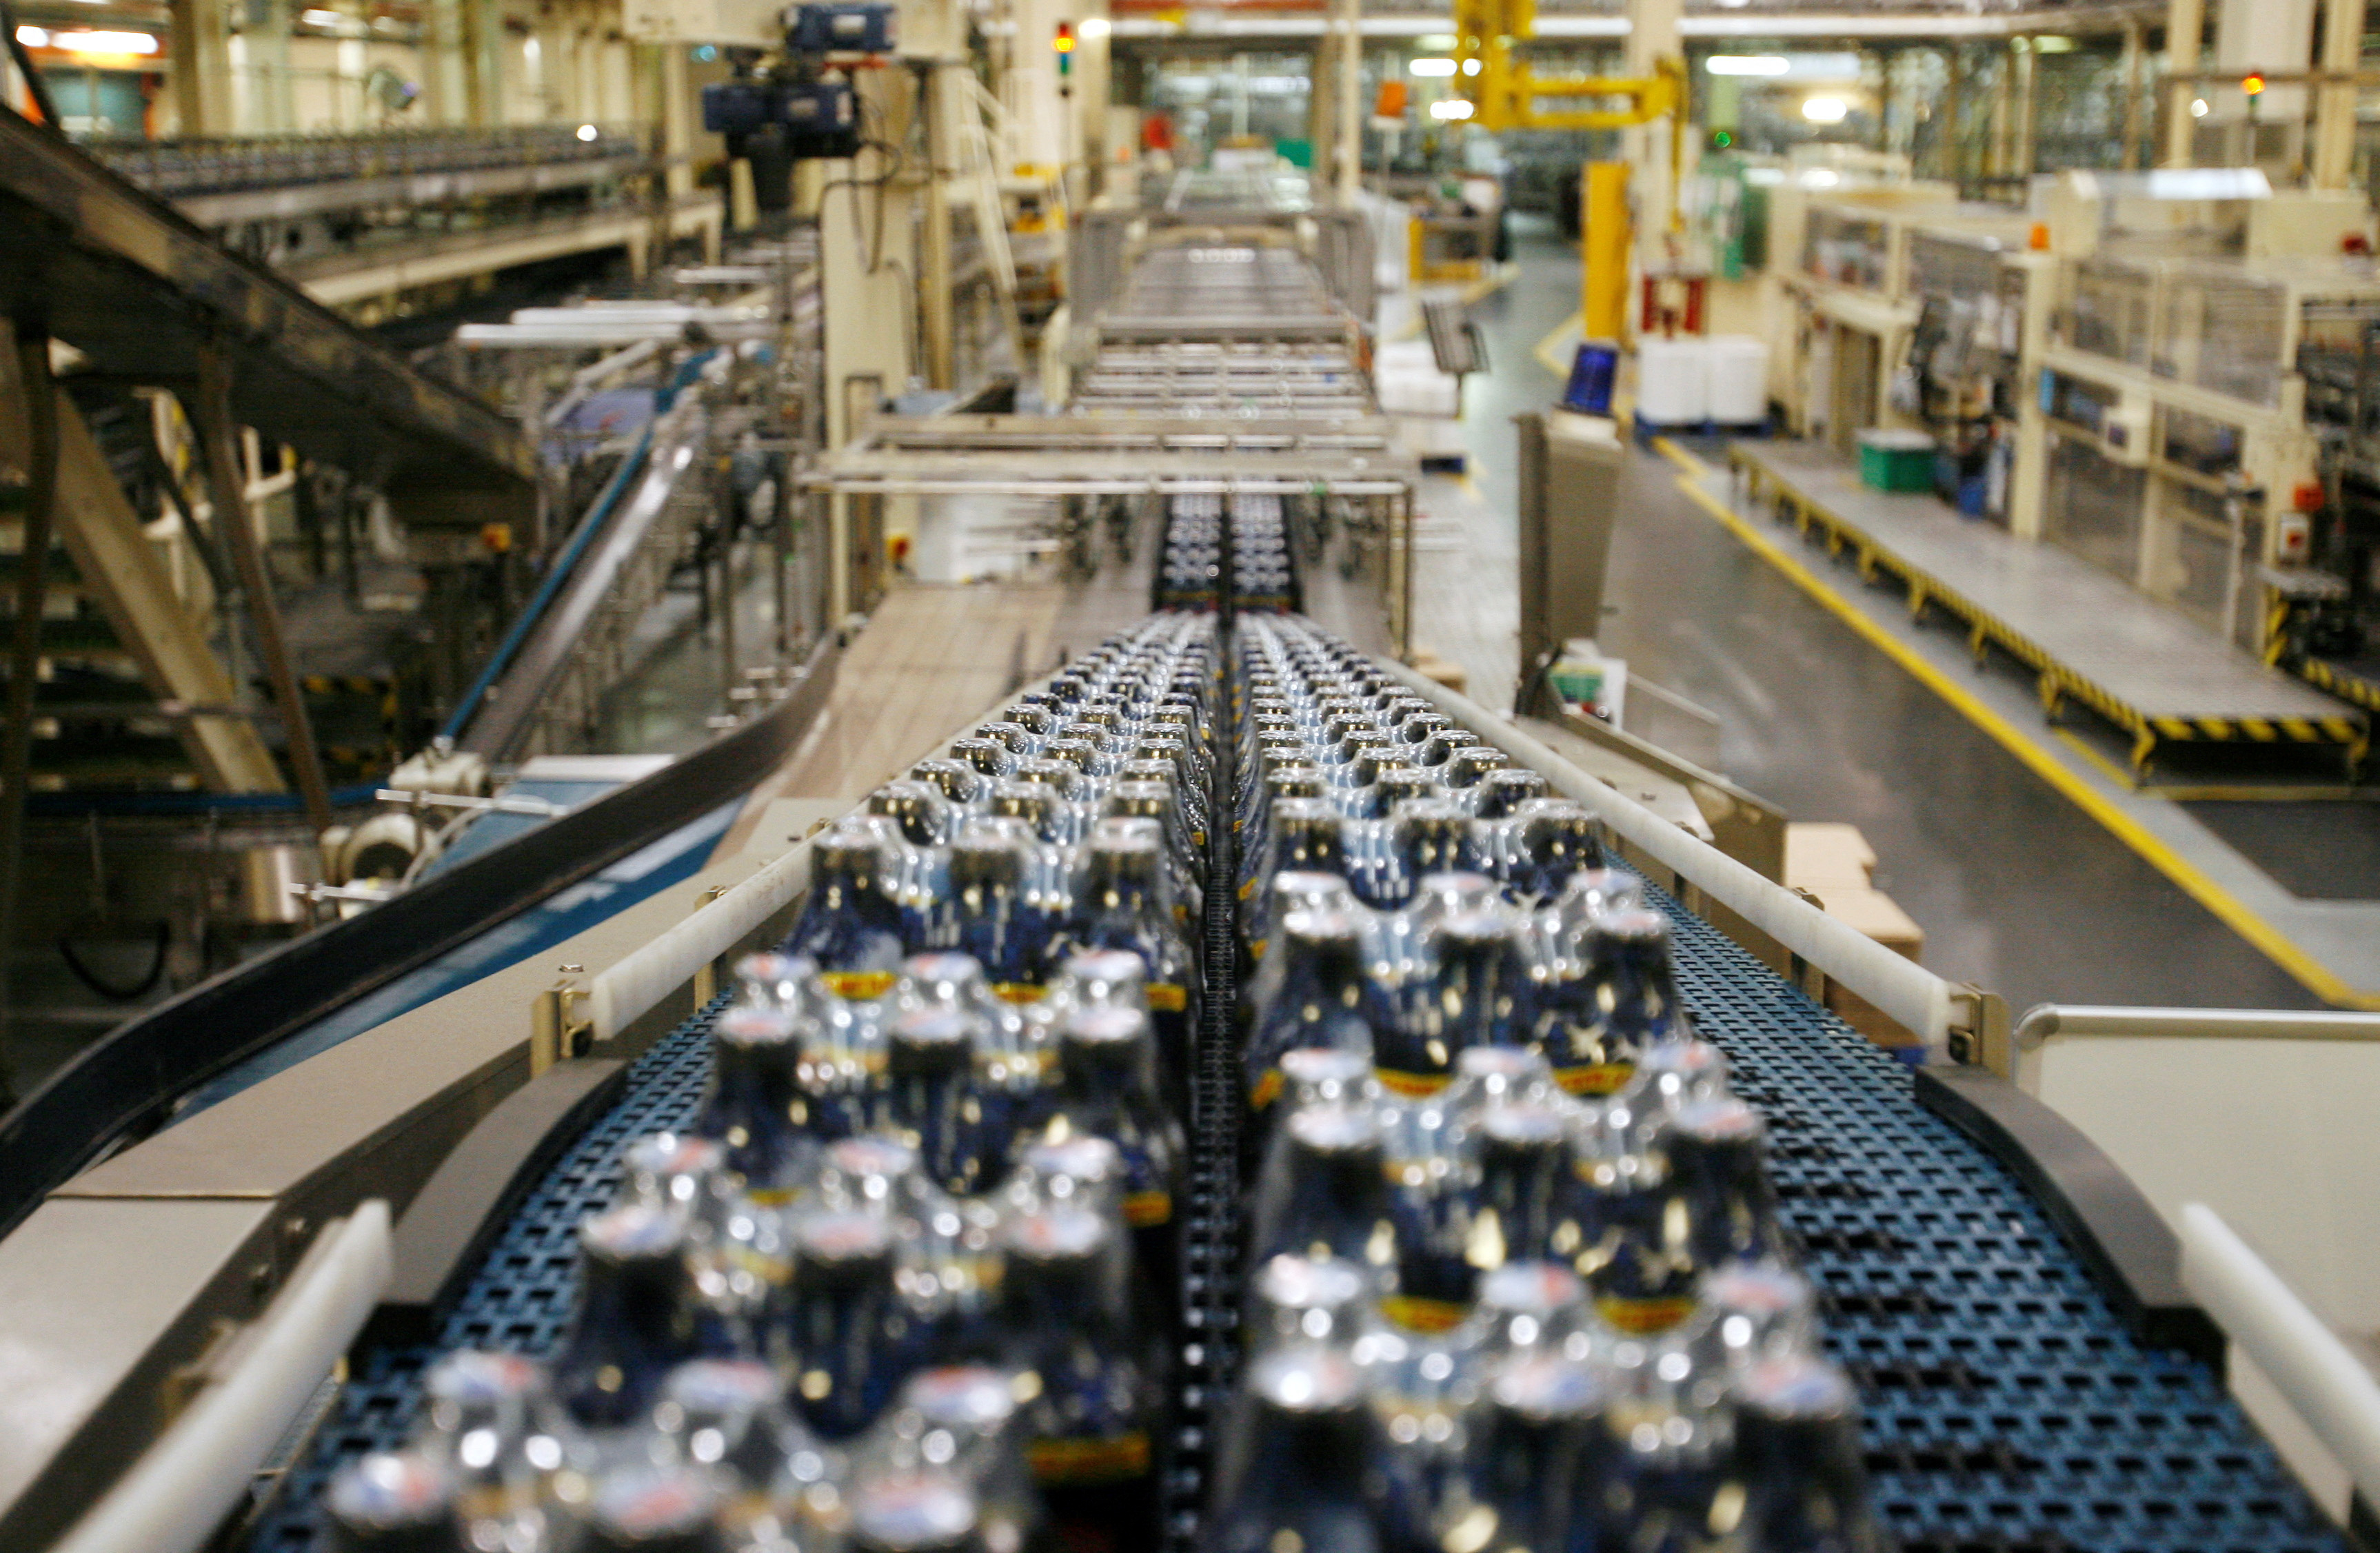 Bottles soft drinks made by drinks company Britvic sit on a conveyor belt at  Britvic's bottling plant in London